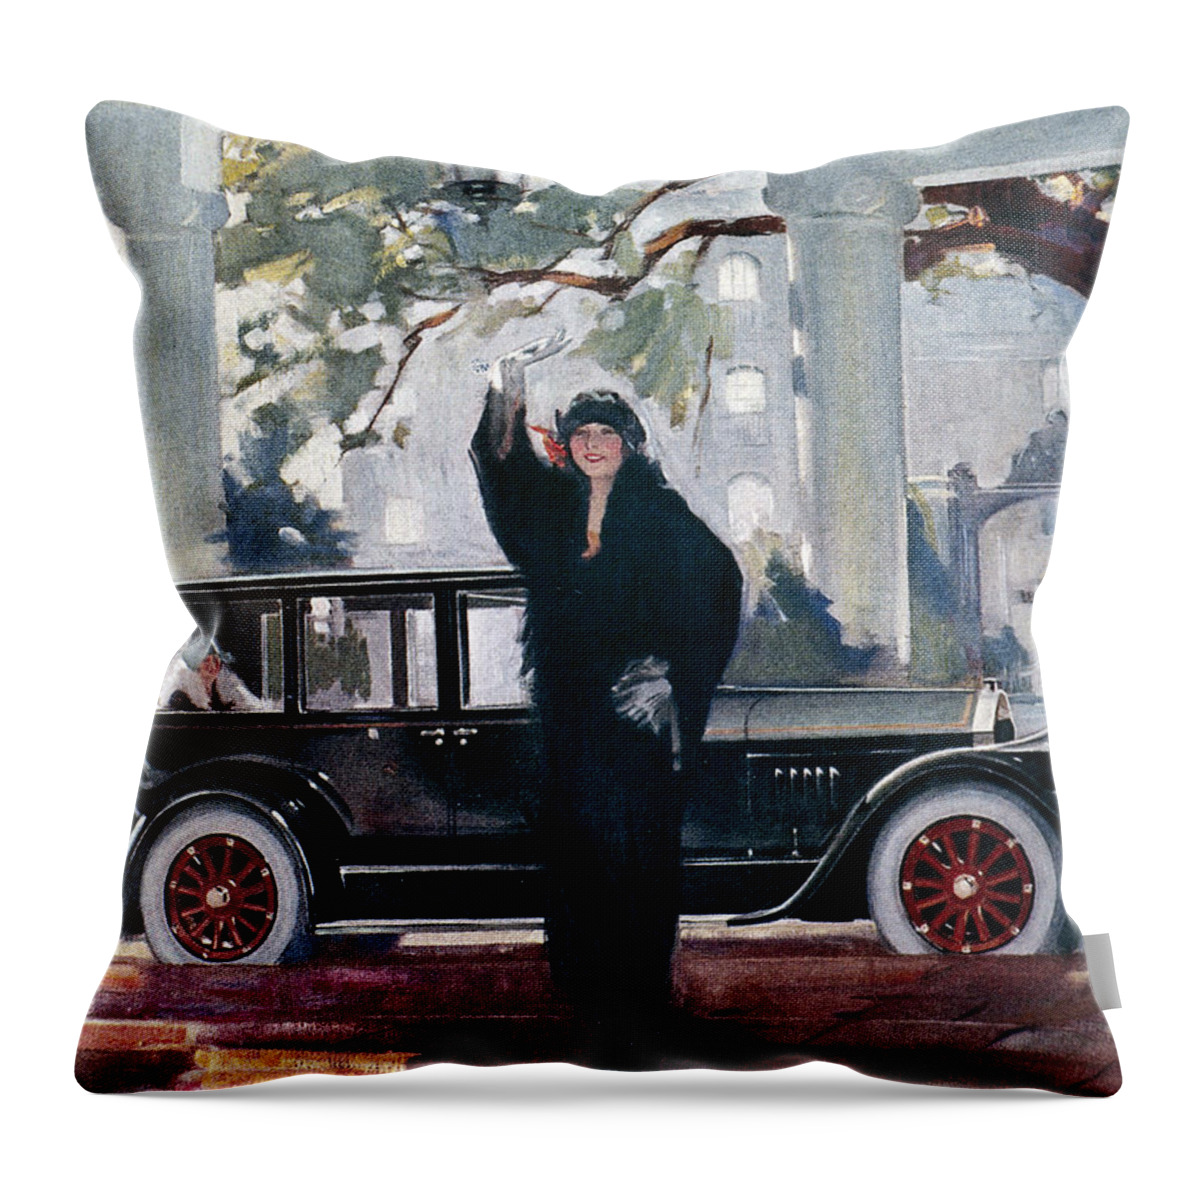 1925 Throw Pillow featuring the photograph Pierce-arrow Ad, 1925 by Granger